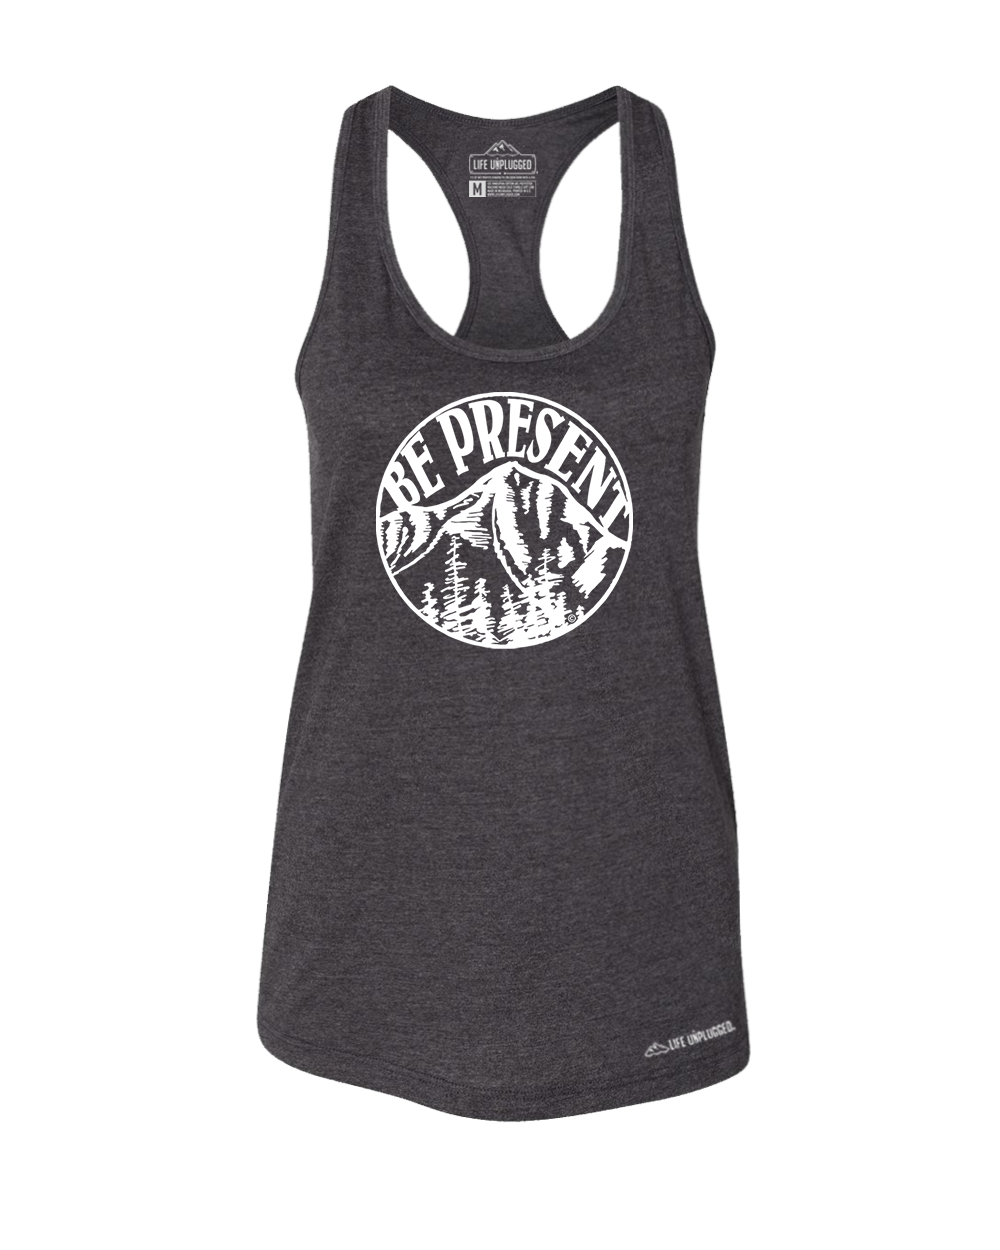 Be Present Mountain Premium Women's Relaxed Fit Racerback Tank Top - Life Unplugged